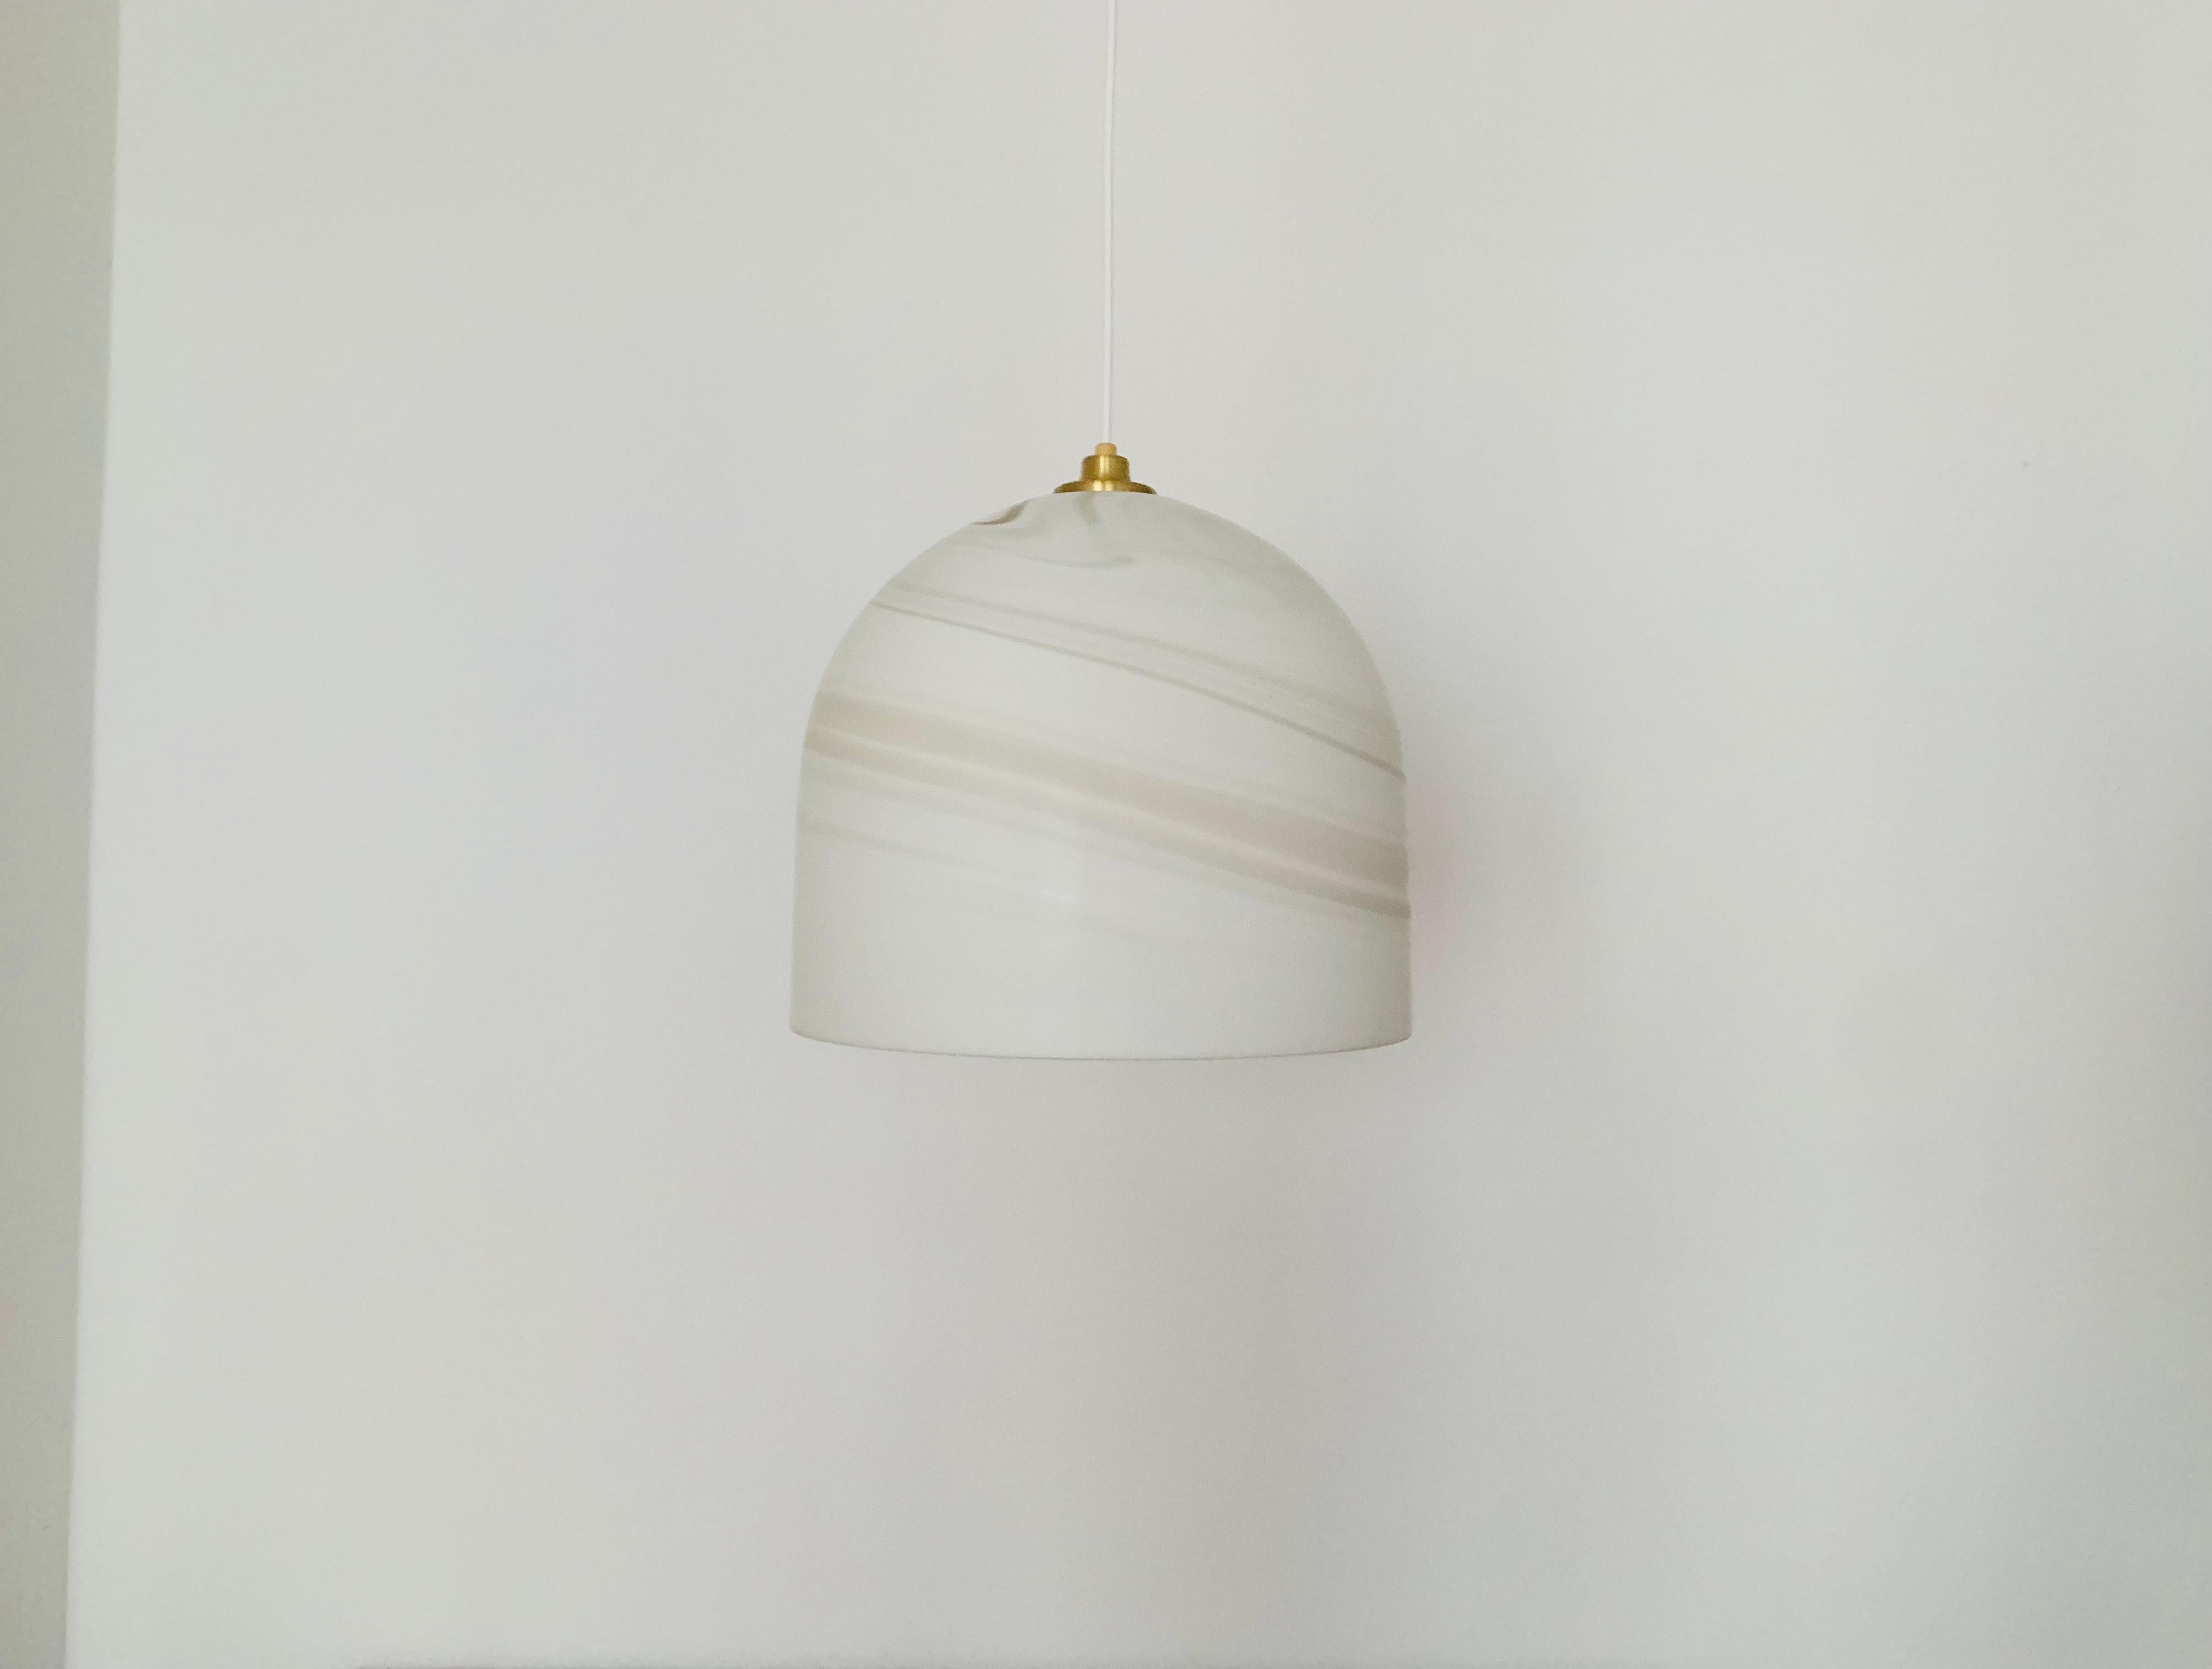 Exceptionally beautiful Carrara glass pendant lamp from the 1960s.
Very fine and beautiful design which fits wonderfully into any room.
The structure in the glass creates a beautiful and very comfortable light.

Manufacturer: Peill and